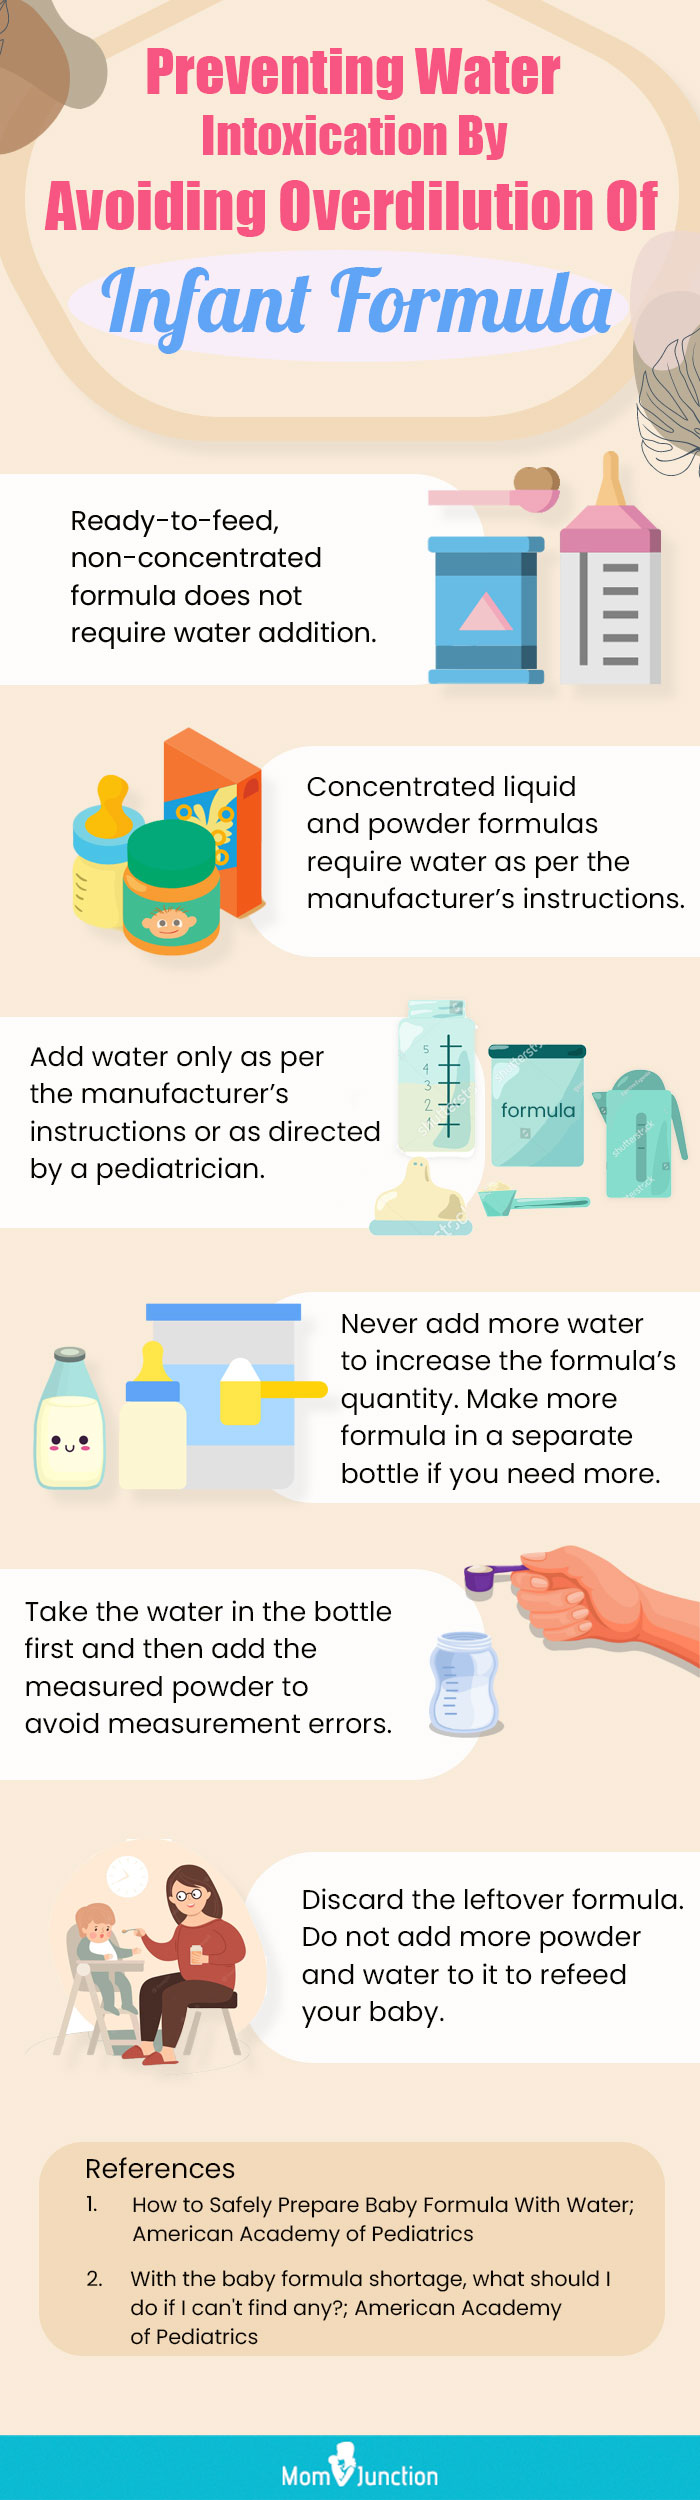 preventing water intoxication by avoiding overdilution of infant formula [infographic]